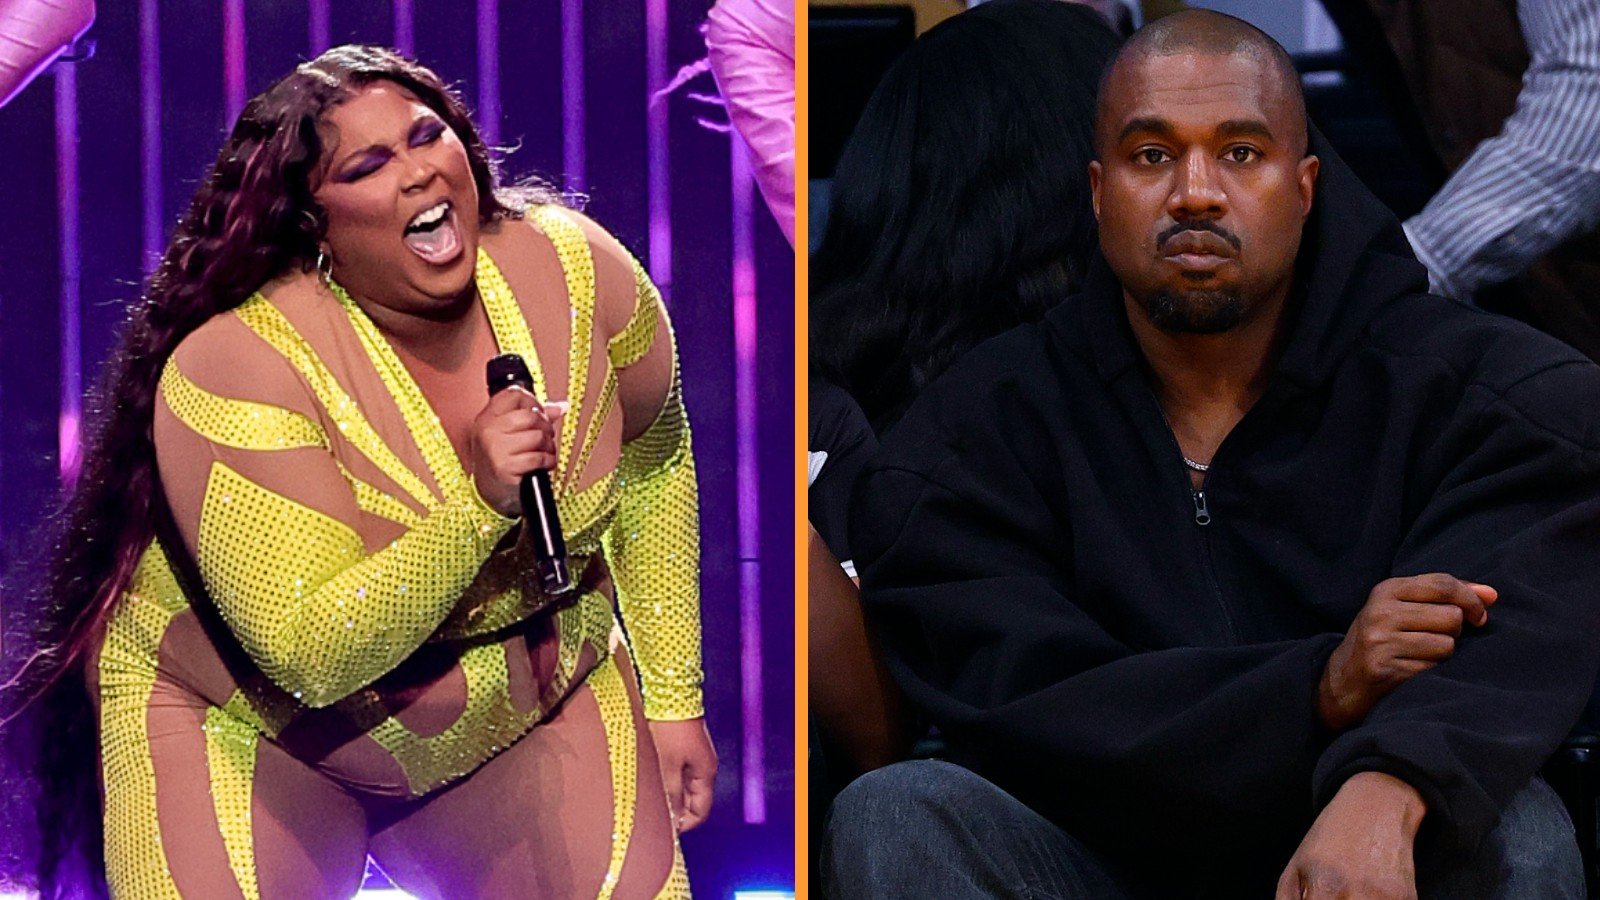 Lizzo Claps Back After Kanye West's Comments About Her Weight